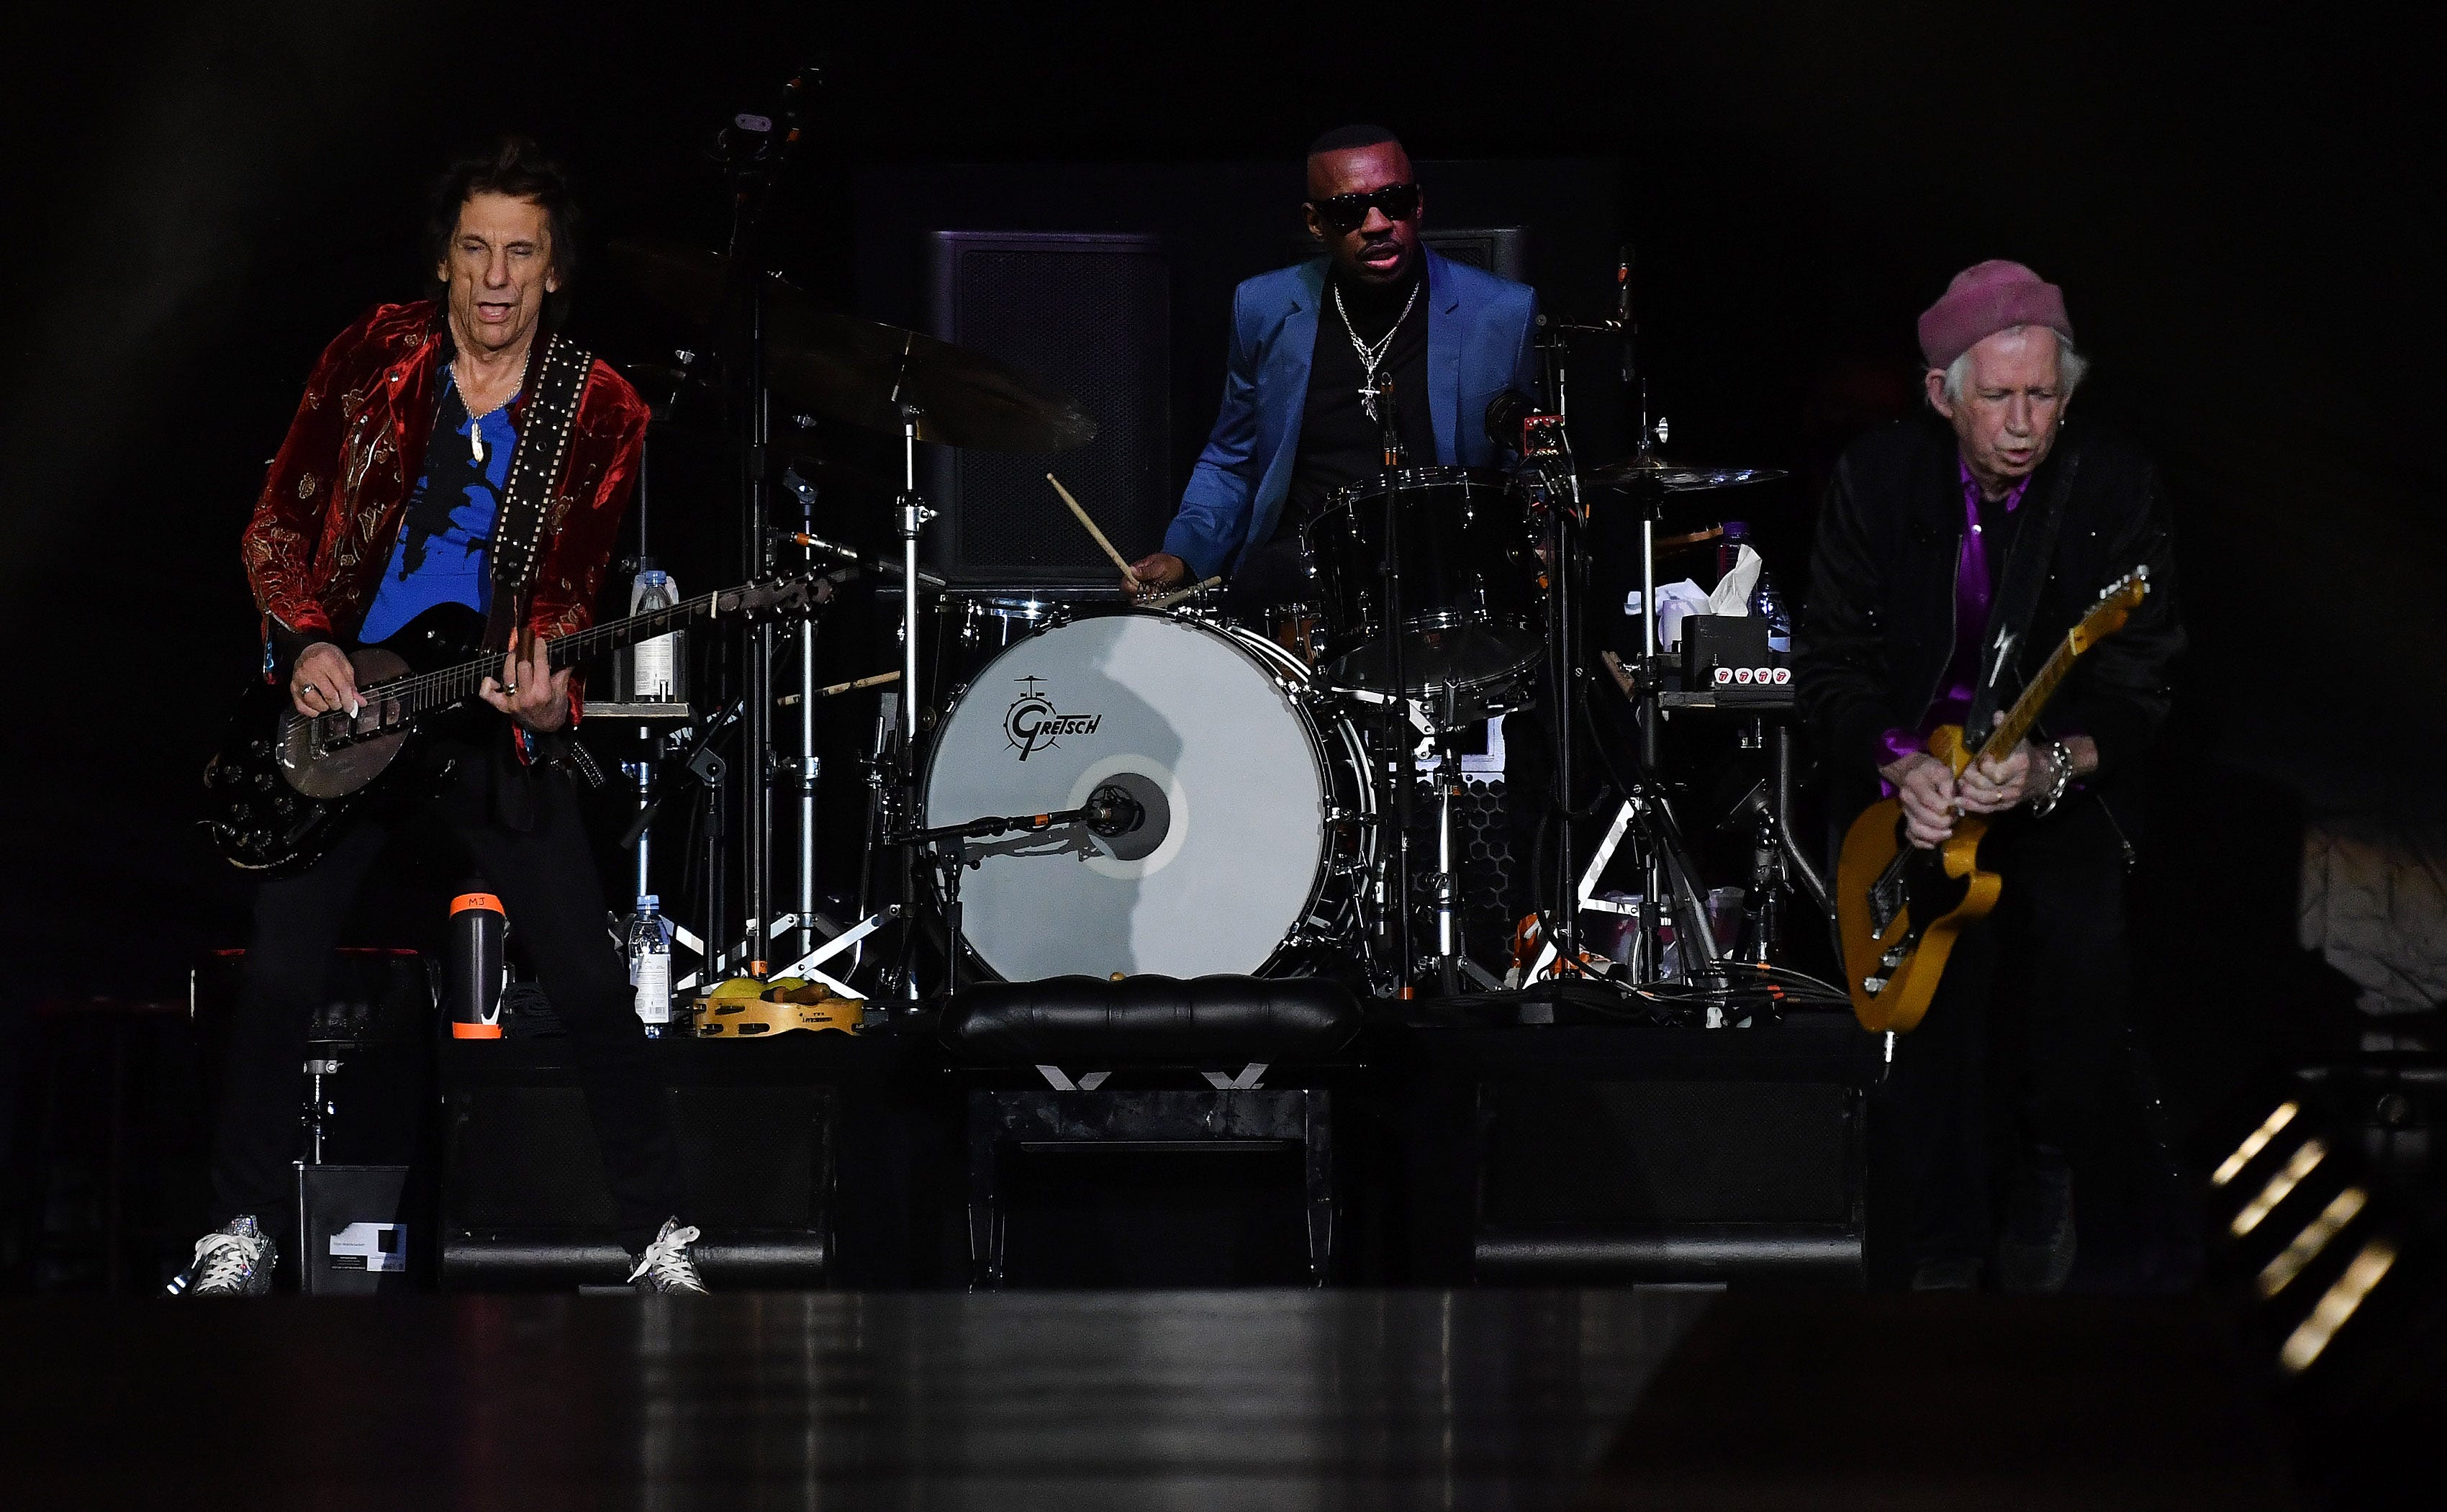 From left, Ronnie Wood, Steve Jordan and Keith Richards.